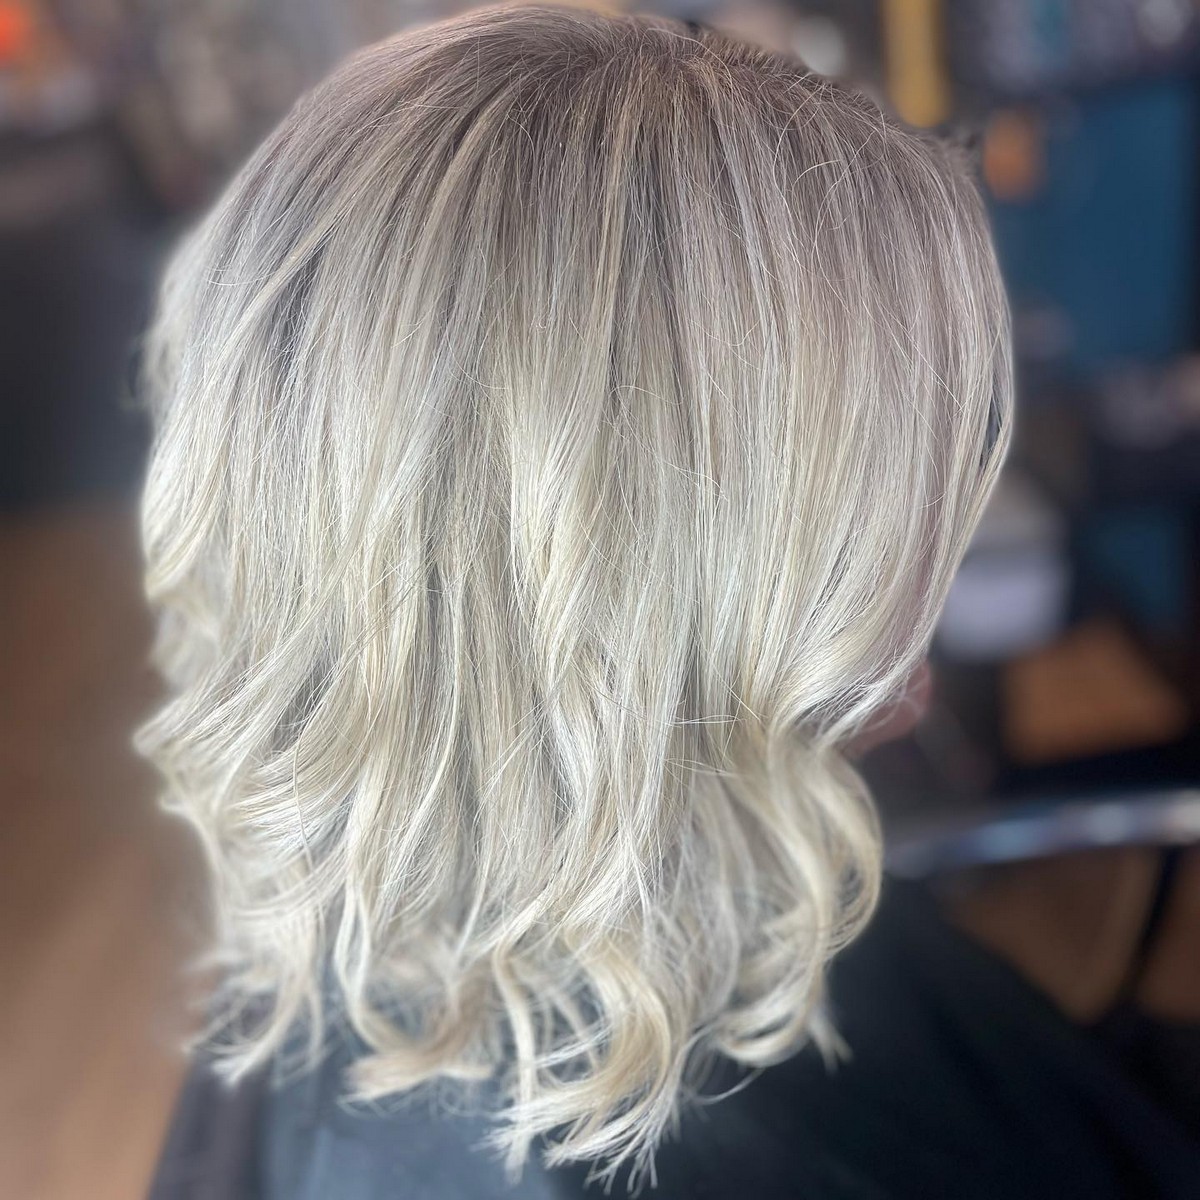 Shiny Blonde Sliver And Medium Thick Extension Hair